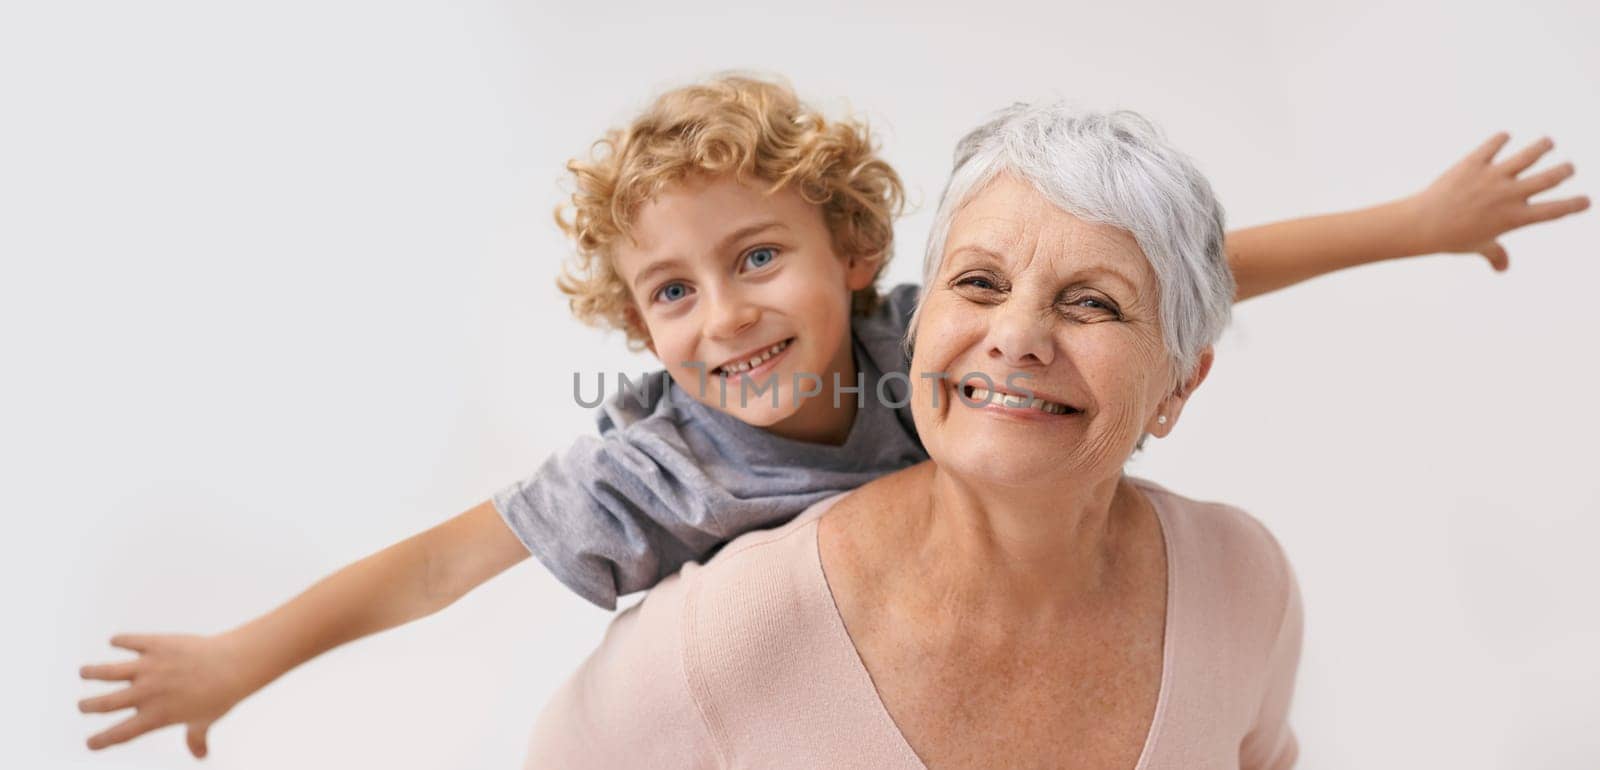 Airplane, smile and portrait of grandmother with child embrace, happy and bond on wall background. Love, face and senior woman with grandchild having fun playing, piggyback and enjoying game together by YuriArcurs